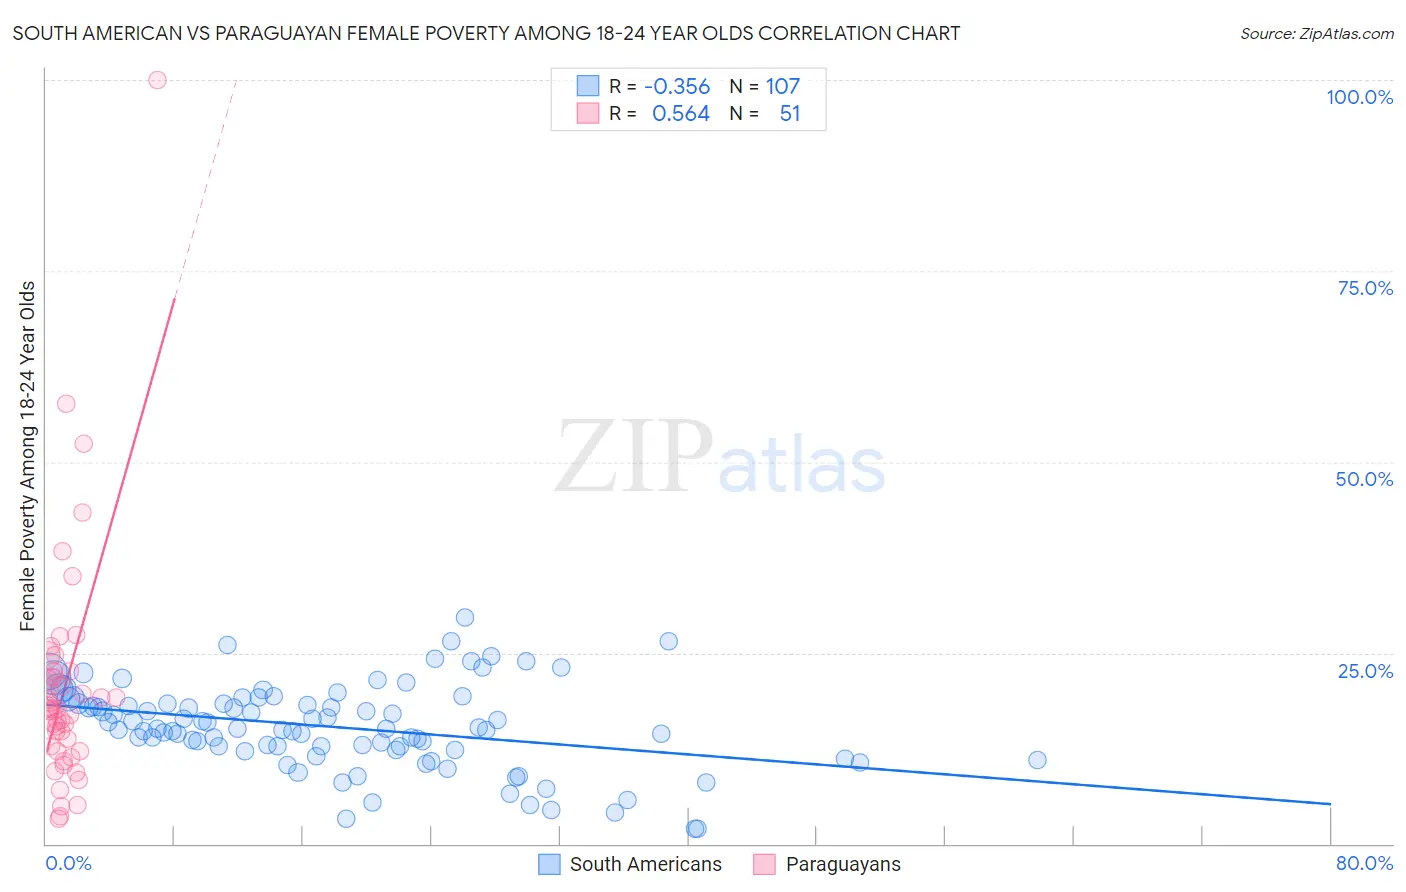 South American vs Paraguayan Female Poverty Among 18-24 Year Olds